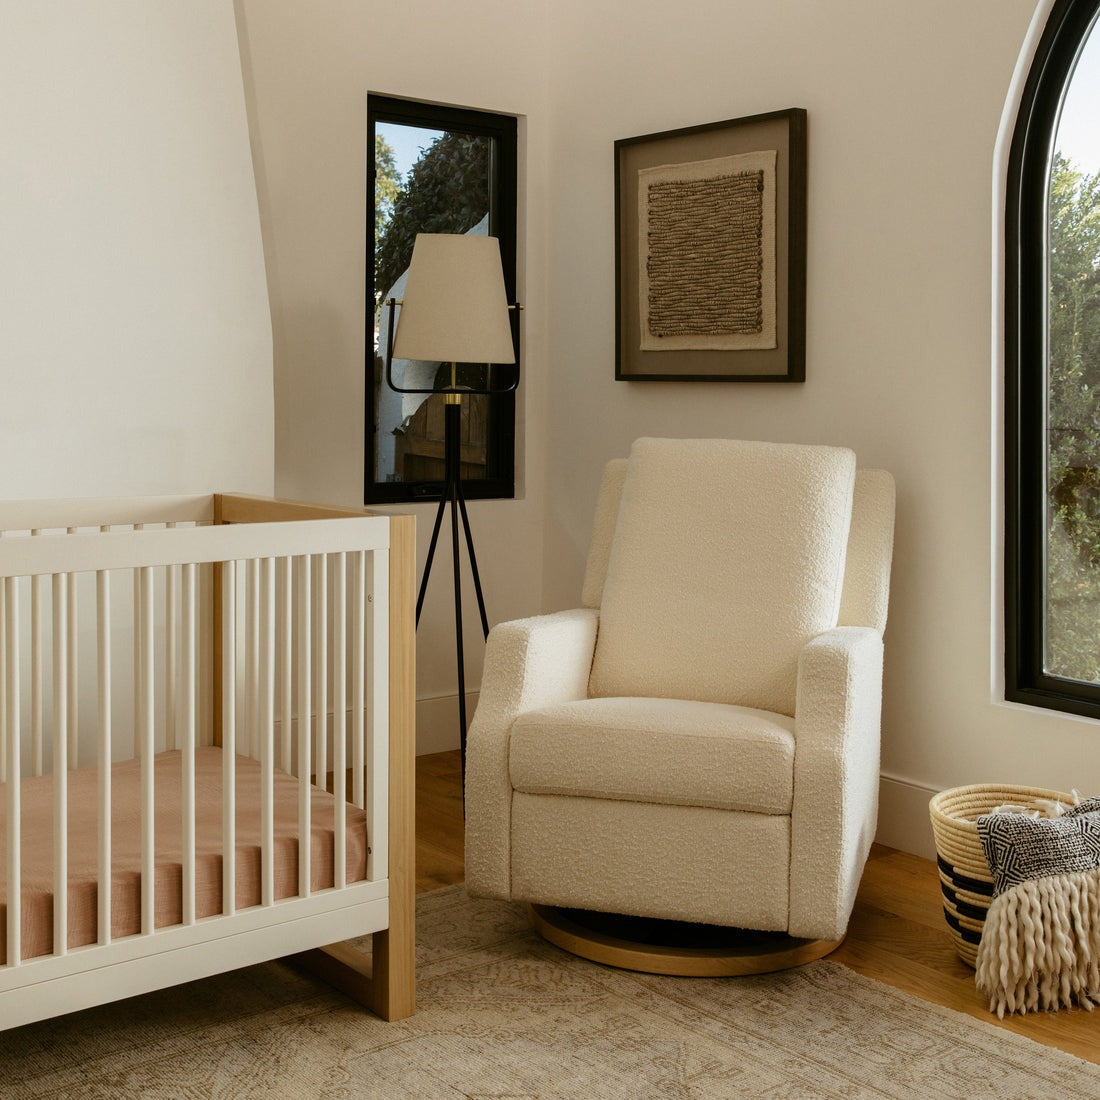 Namesake Crewe Recliner and Swivel Glider - Ivory Boucle with Light Wood Base in nursery